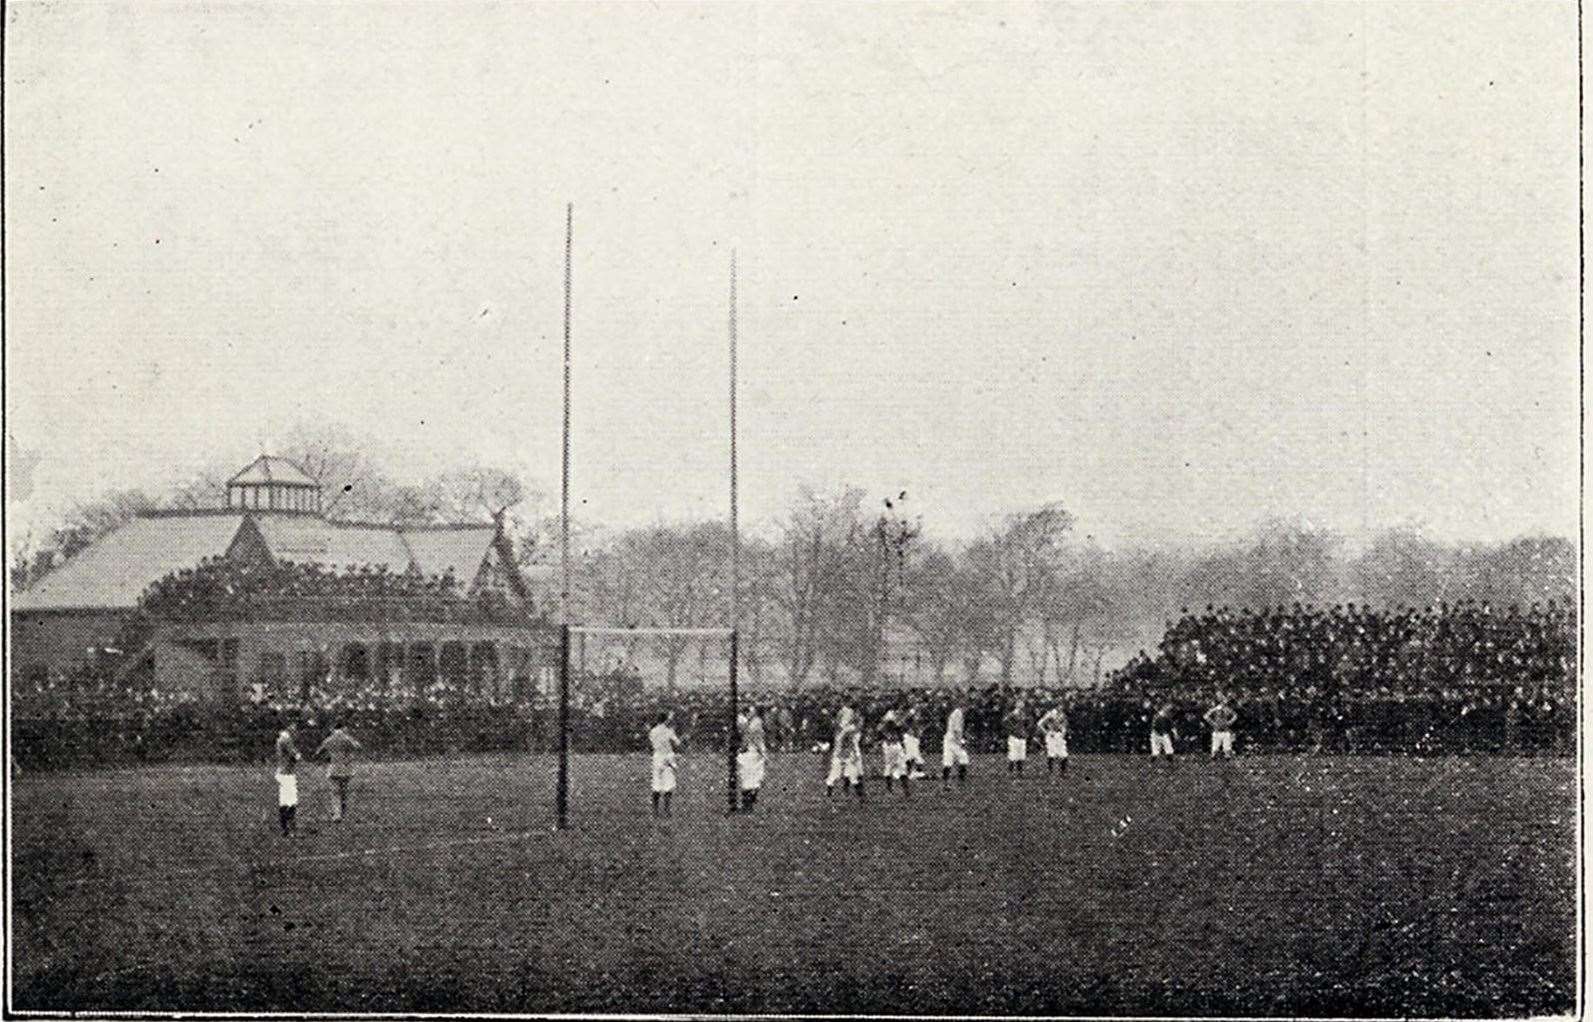 Blackheath sports ground where cricket was played pictured in 1890. Picture: Blackheath Football Club Archive/Kent County Cricket Grounds by Howard Milton and Peter Francis